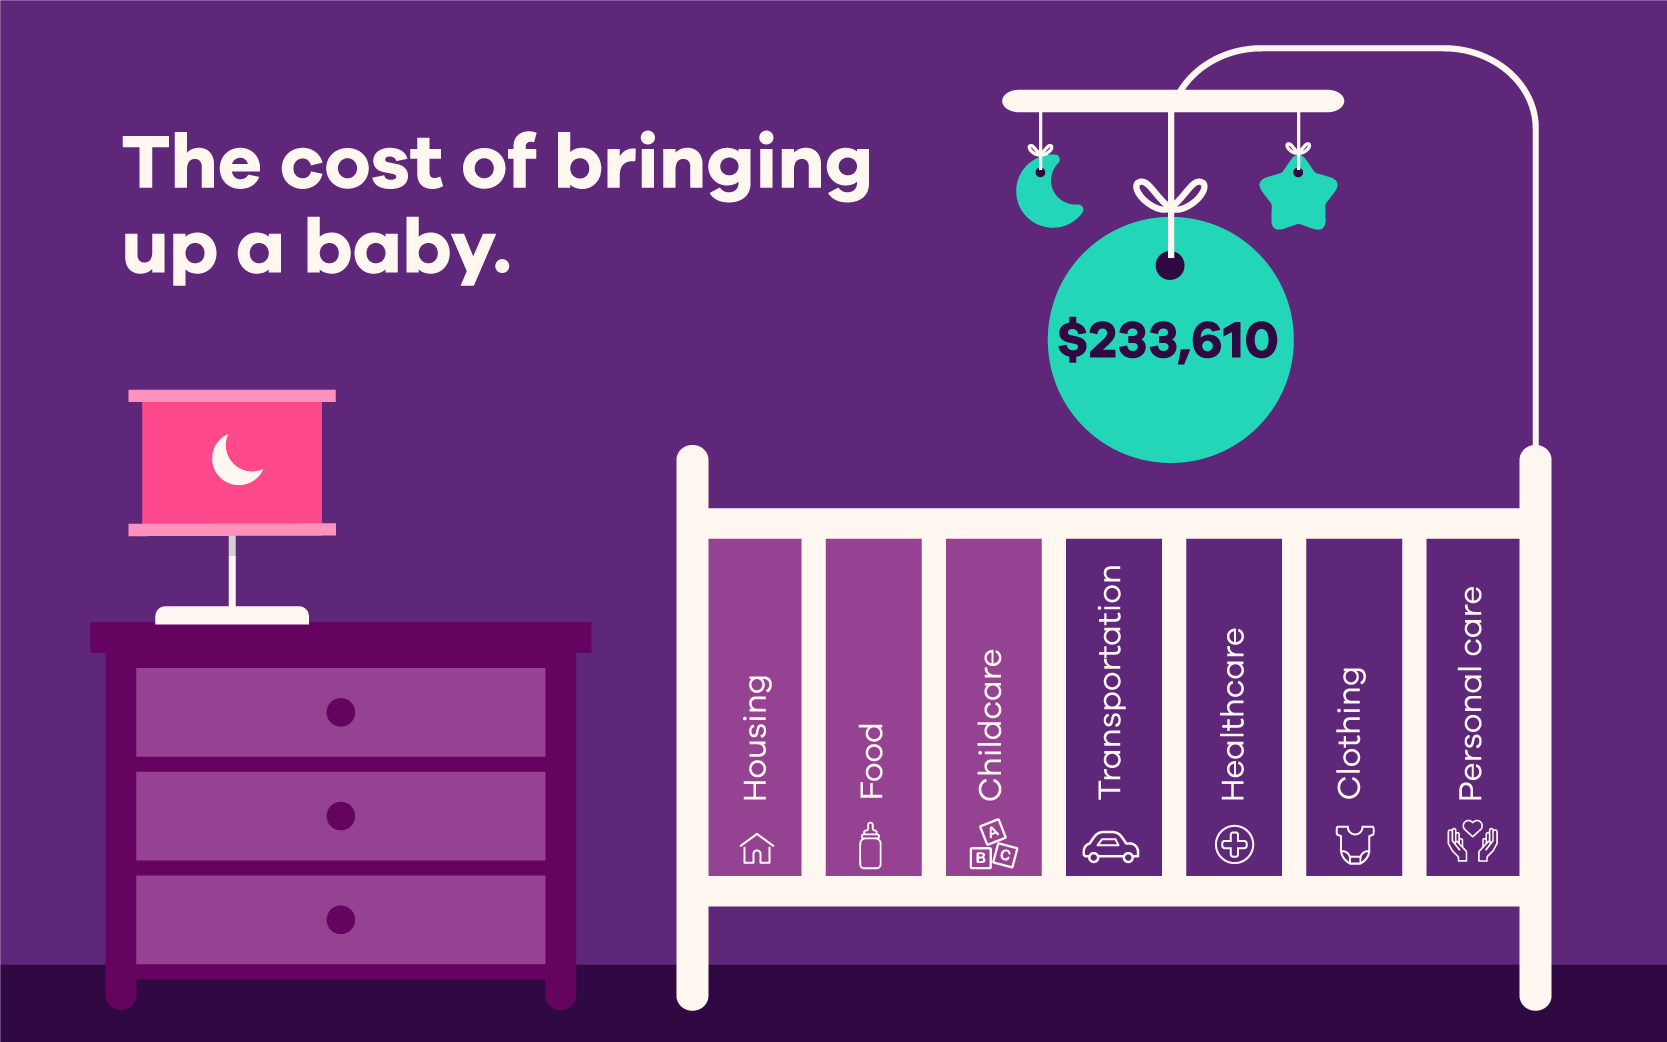 Illustration of a baby room with a crip. Text overlay: The cost of bringing up a baby. $233,610. Housing, food, childcare, transportation, healthcare clothing, personal care.